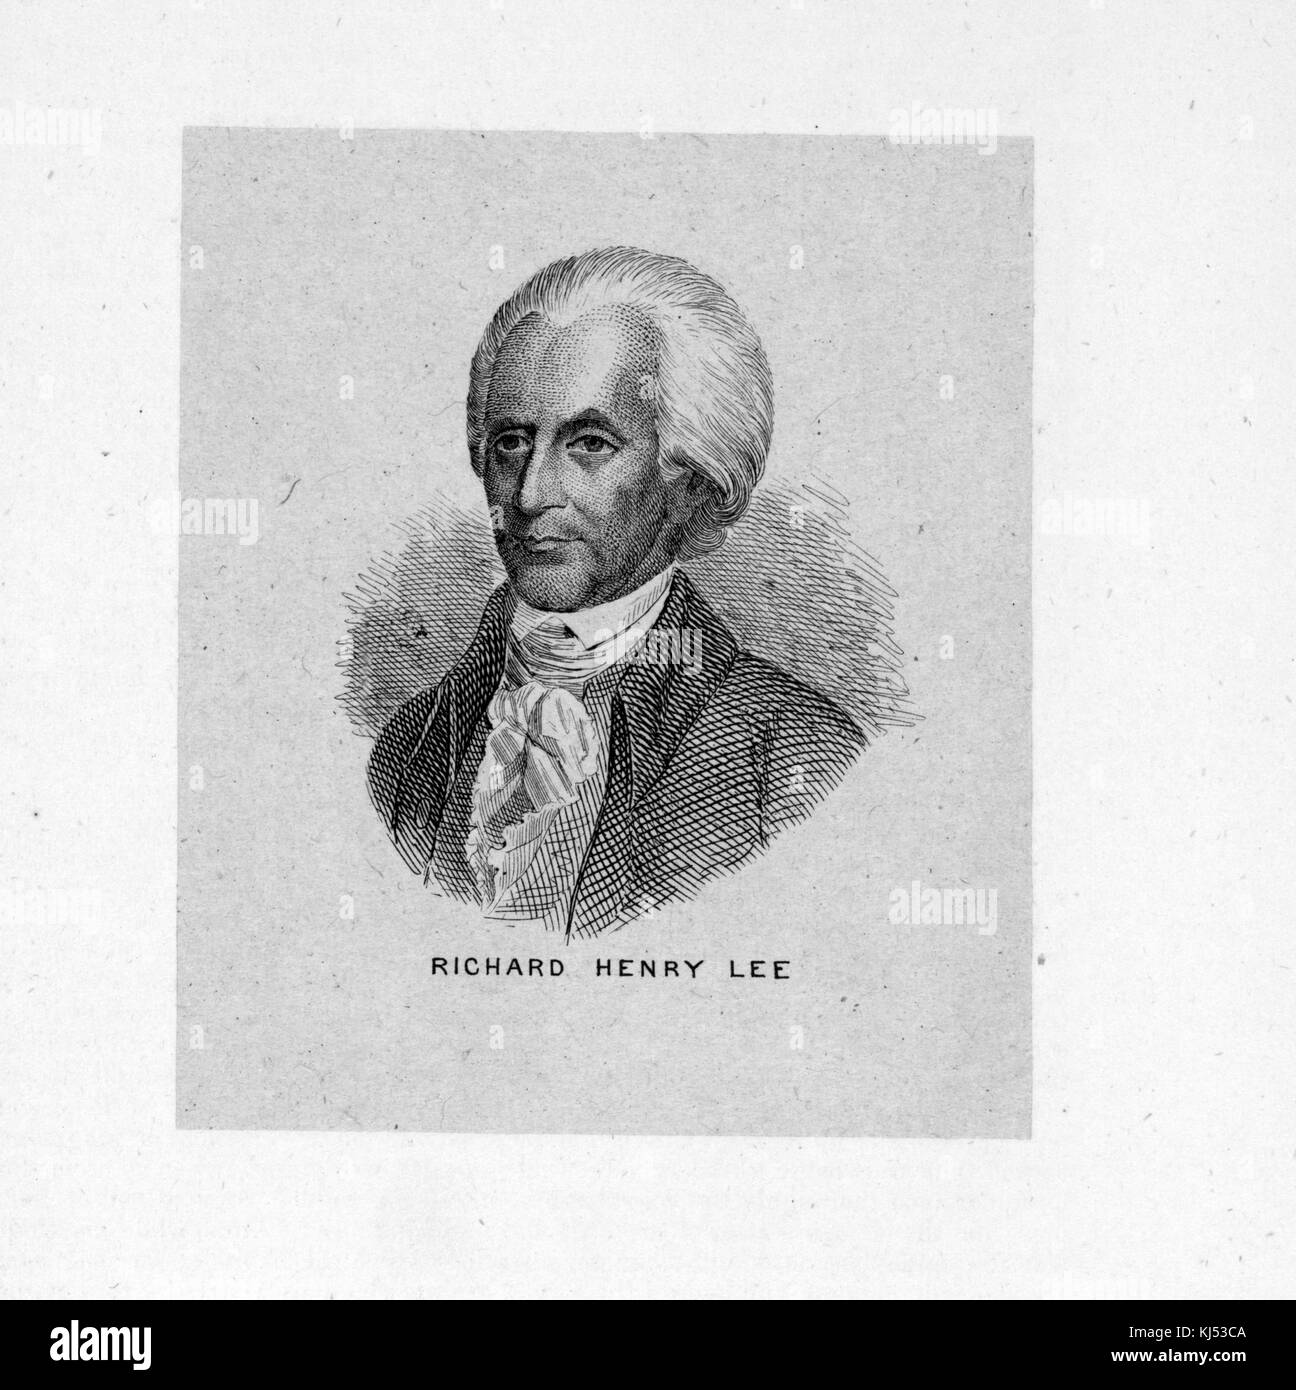 An engraving from a portrait of Richard Henry Lee, he was an American politician who became most famous for his motion in the Second Continental Congress calling for the colonies to declare independence from Great Britain, he signed both the Articles of Confederation and the Declaration of Independence, 1880. From the New York Public Library. Stock Photo